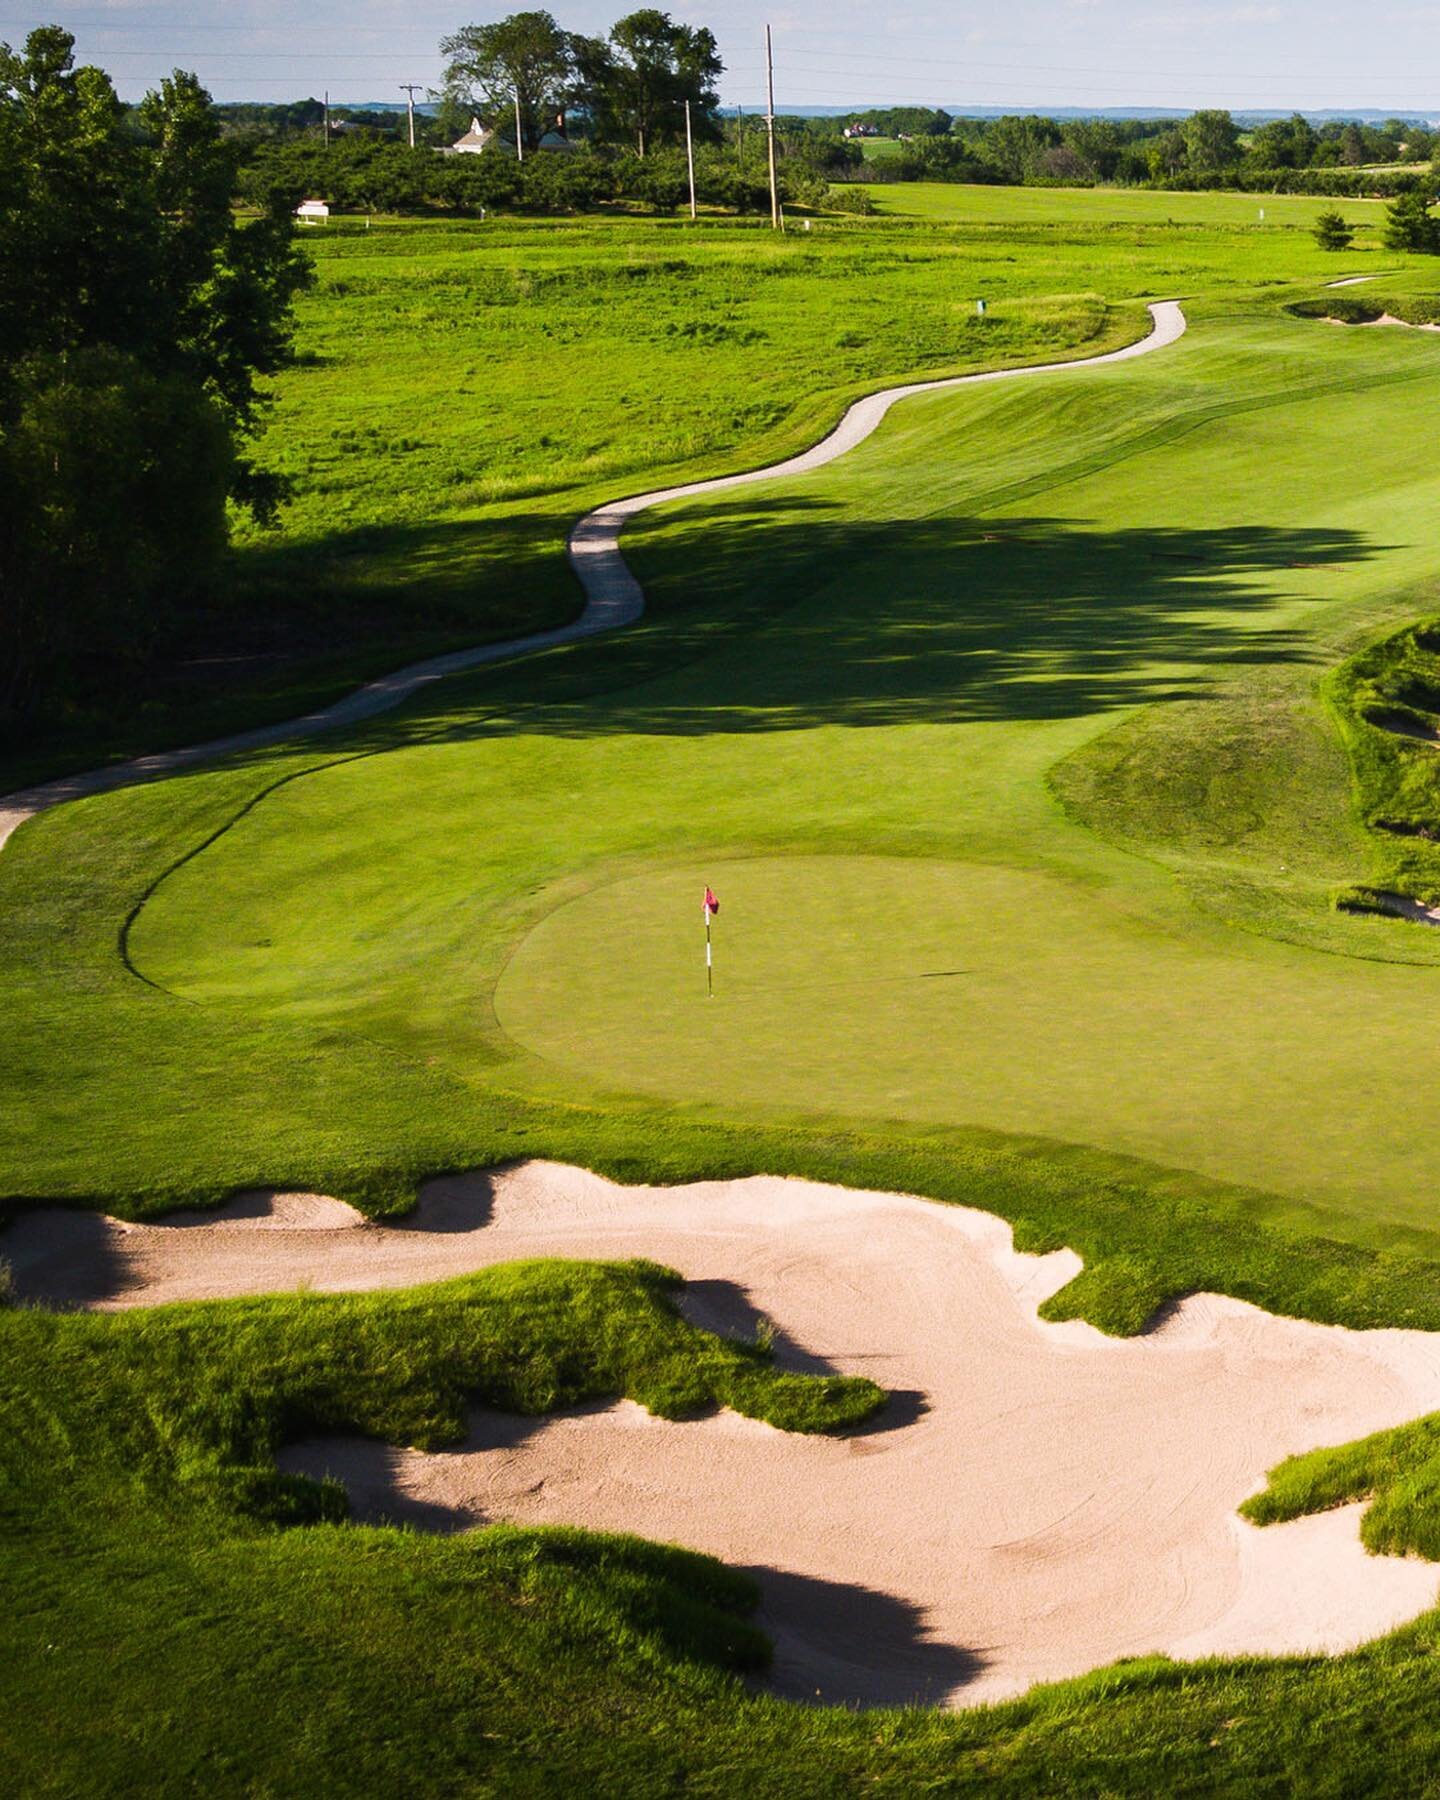 The Par 4, 5th hole at @arborlinks. Tag someone who would get stuck in those bunkers 😳 #Fore #DormieNetwork